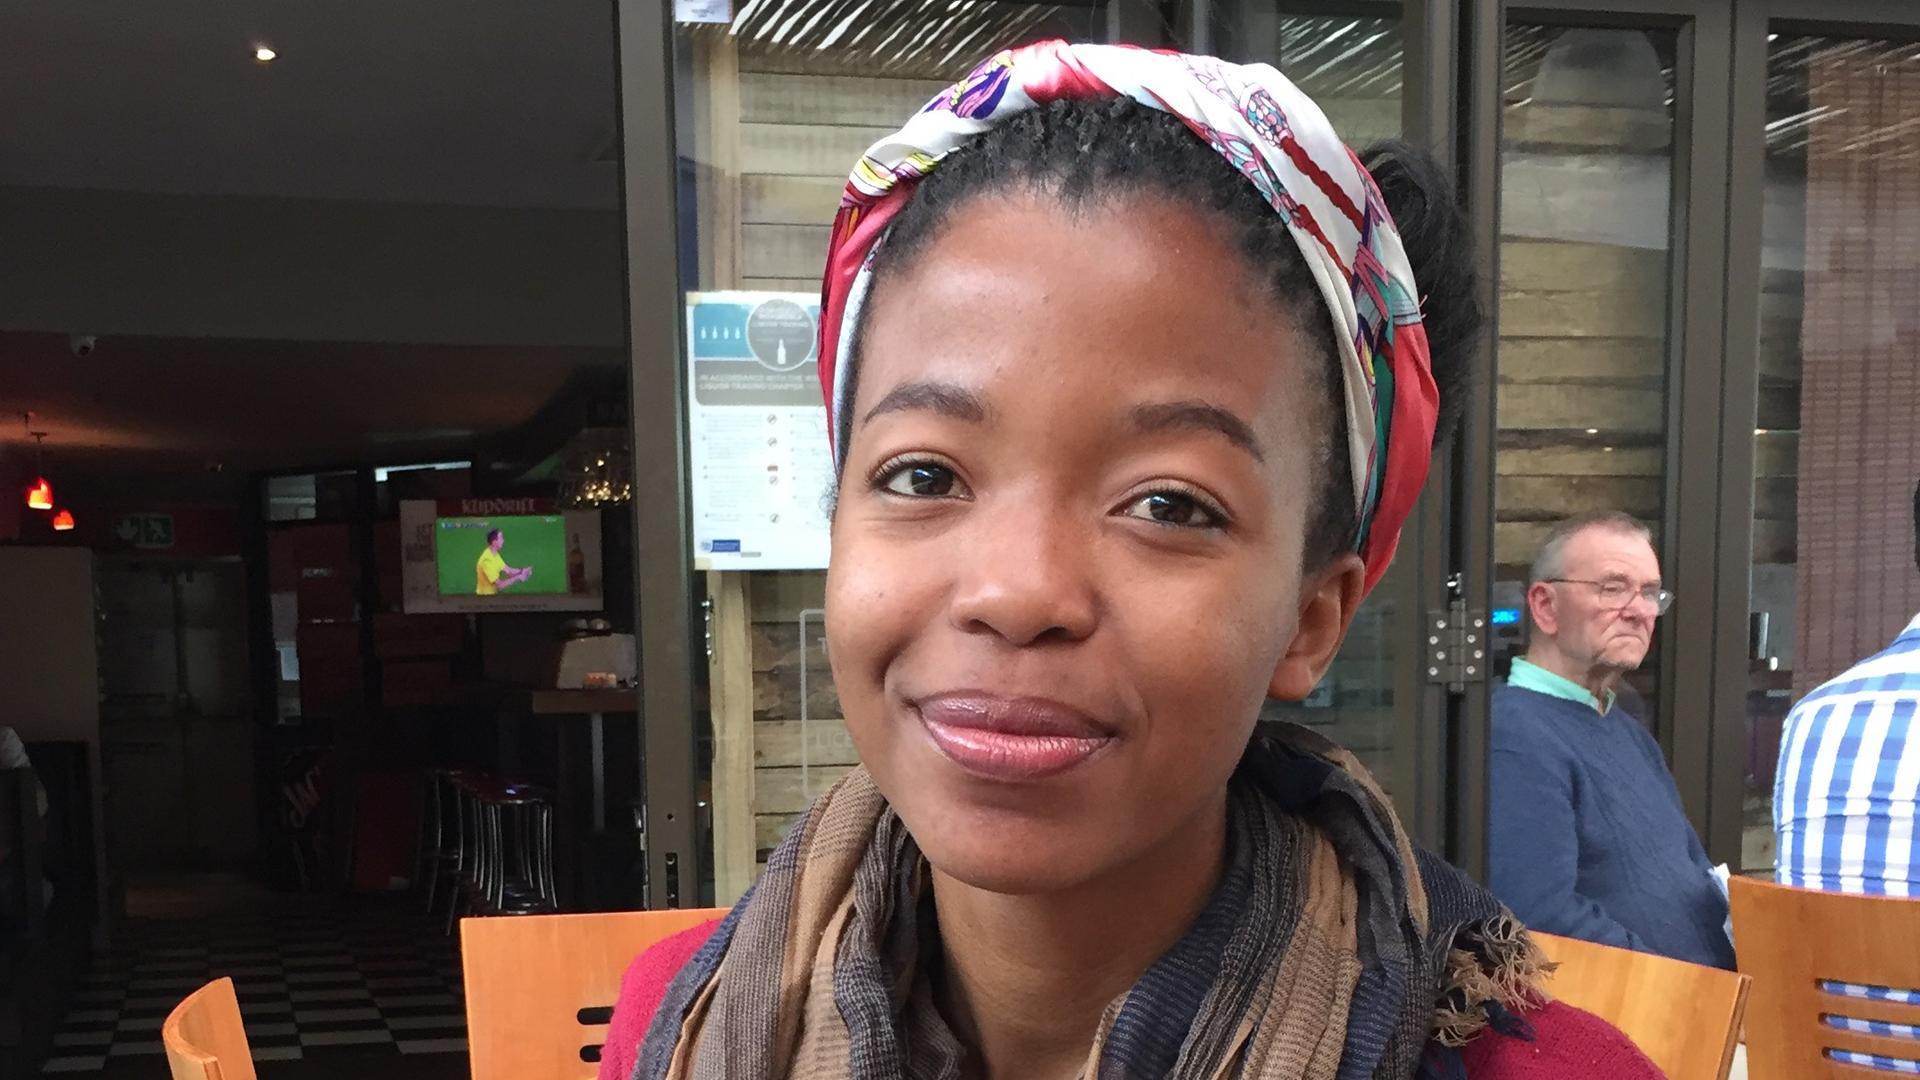 Mapaseka Setlhodi is part of South Africa's "born free" generation, but she says her government has failed to fulfill its promises to young people like her.